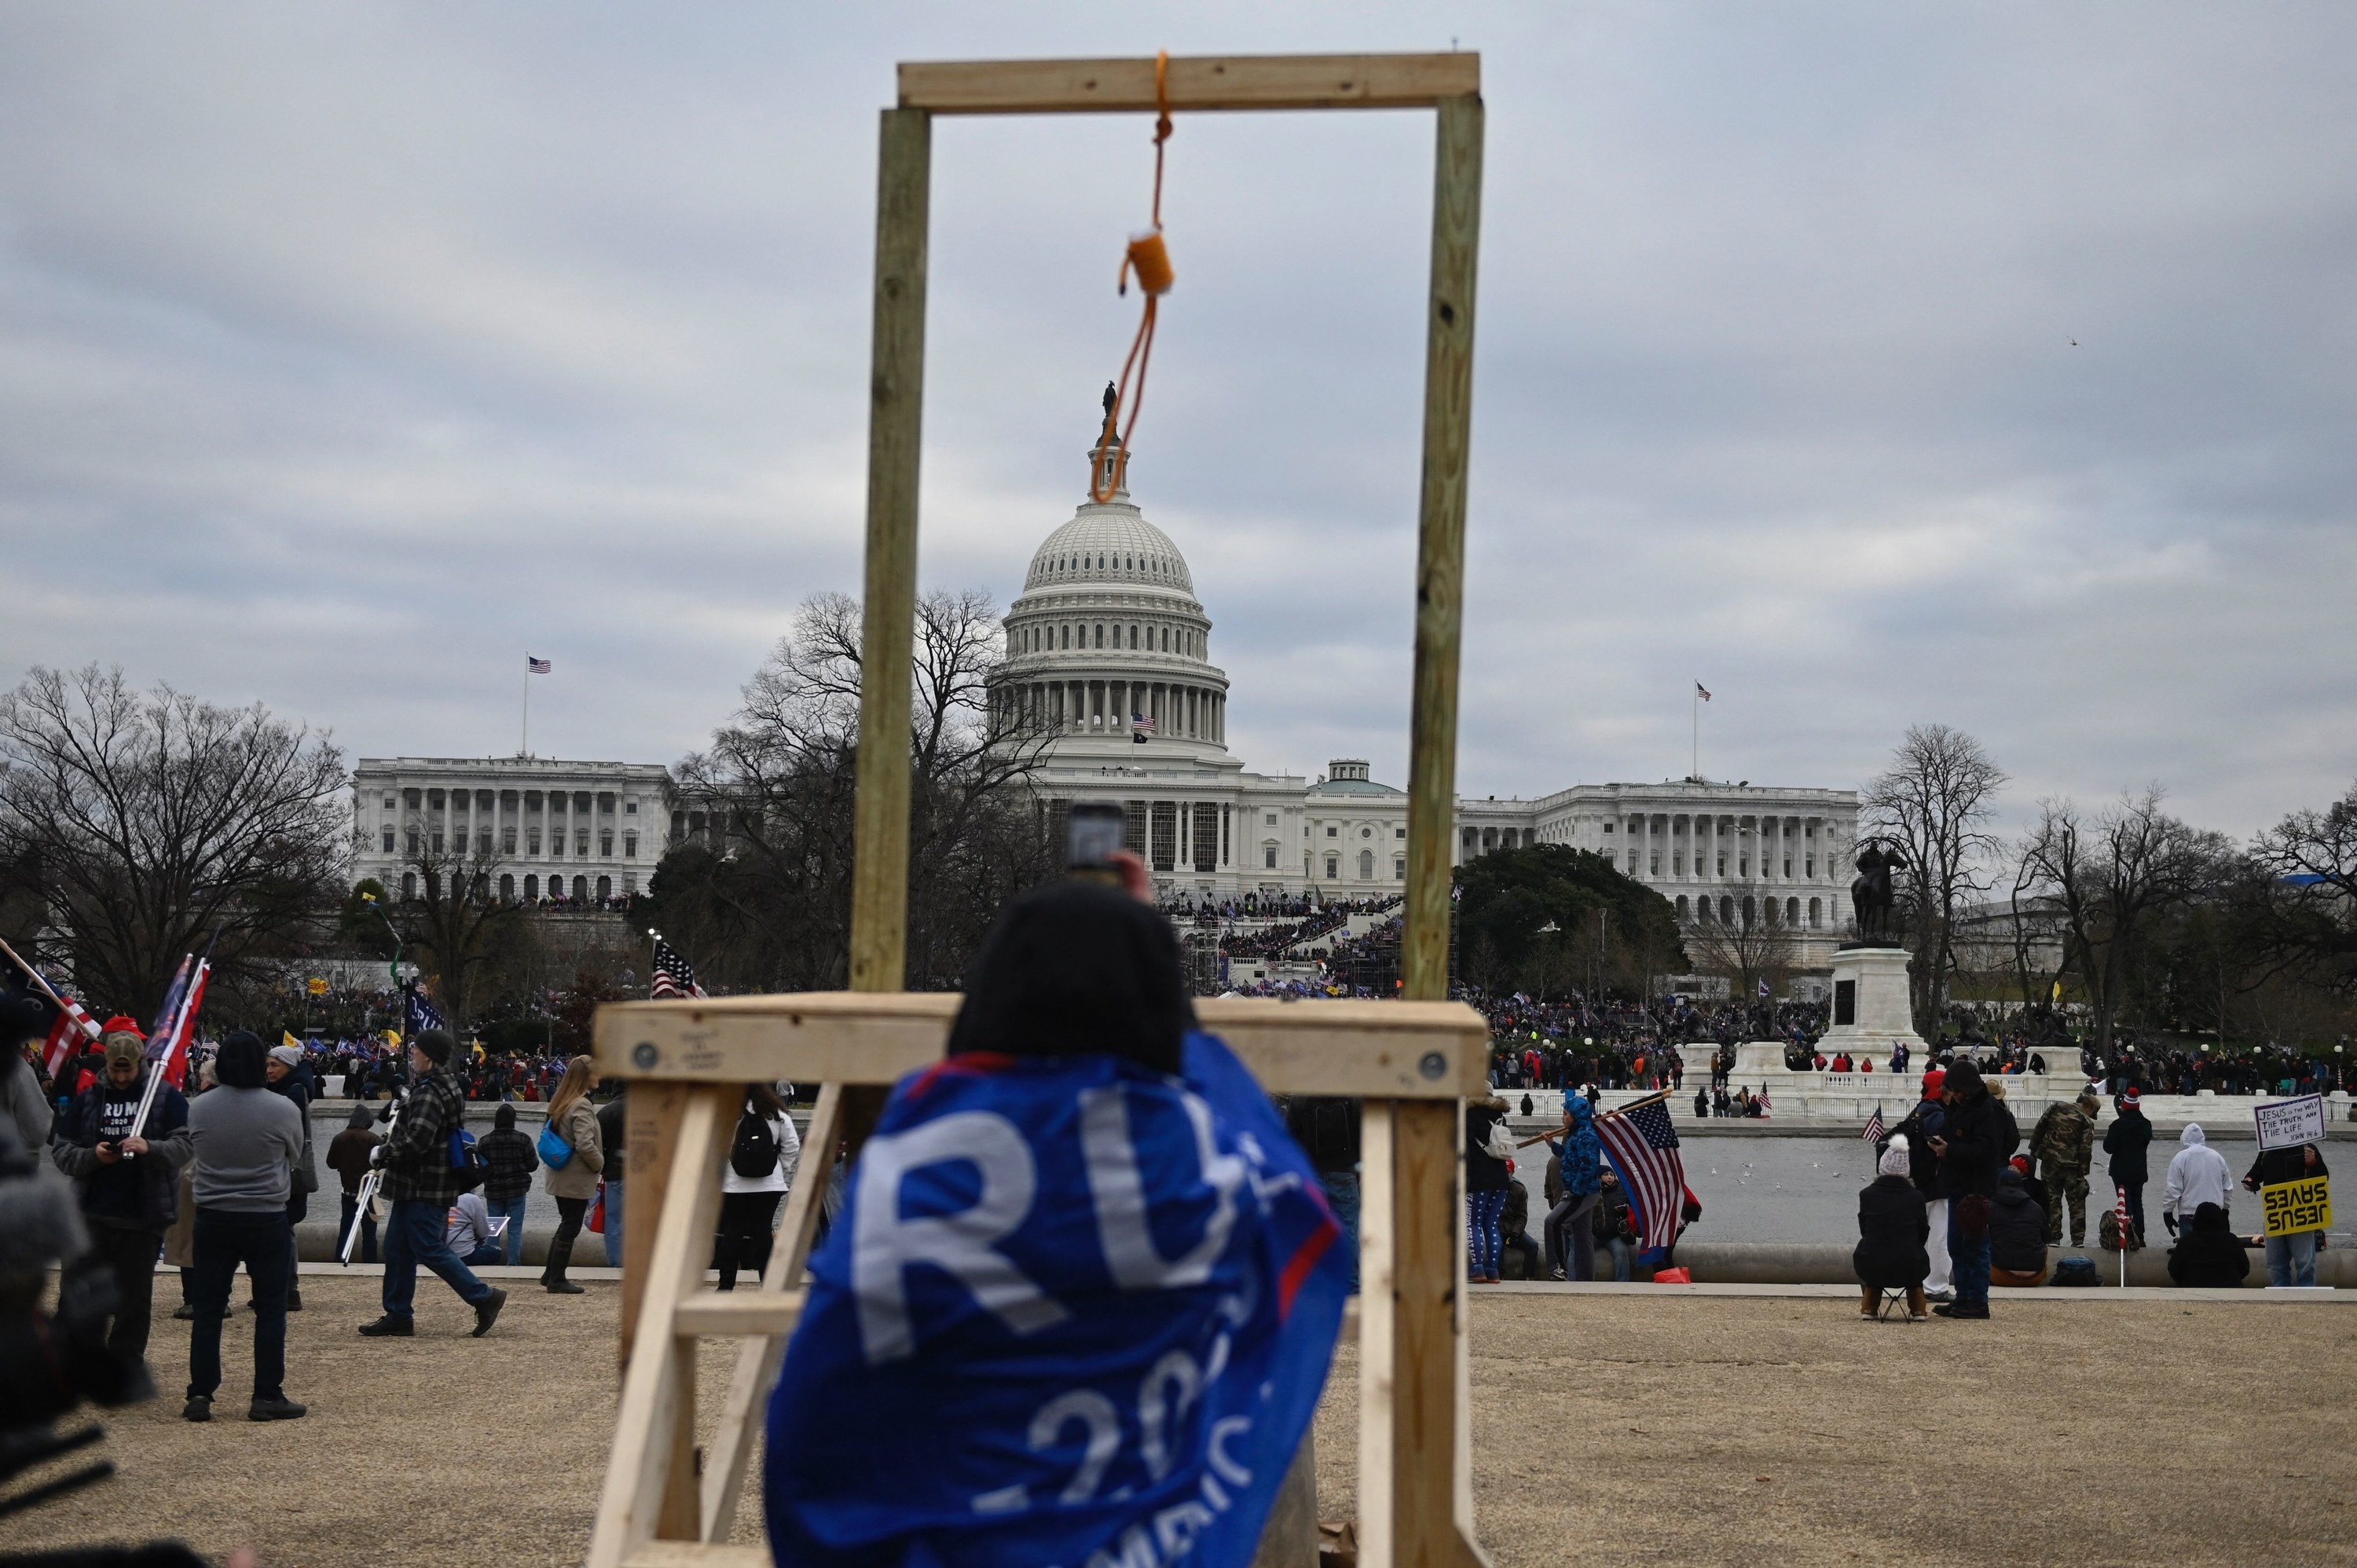 A woman wearing a Trump 2020 flag as a cape stands in front of a noose that was erected in front of the Capitol building